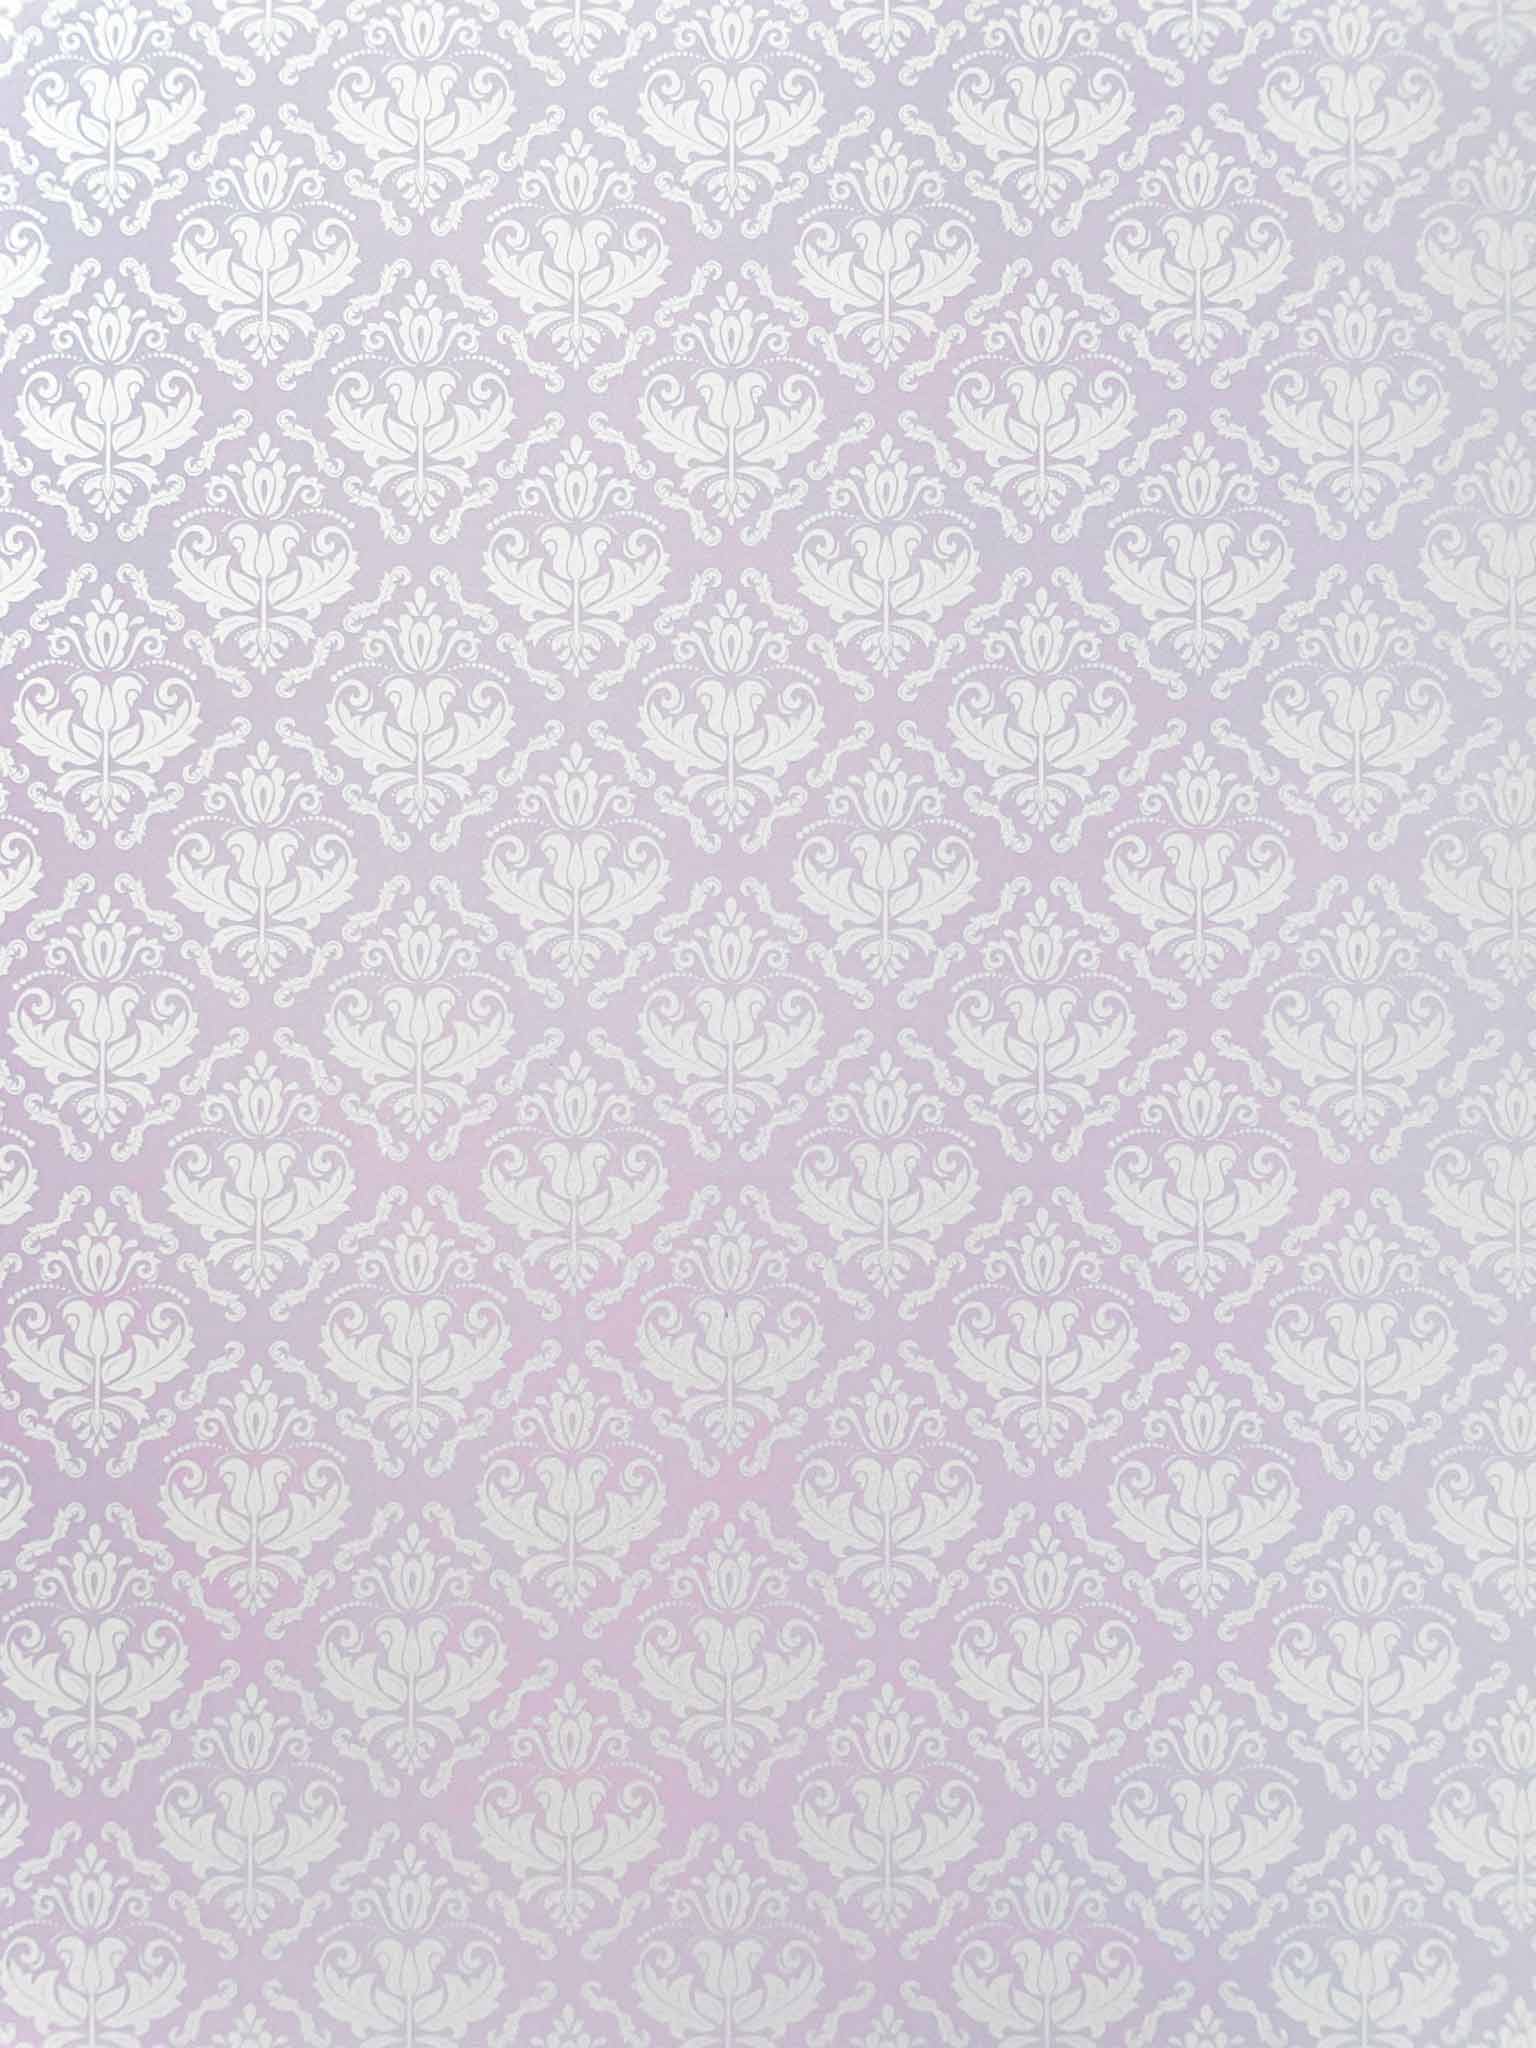 lilac-and-white-damask-pattern-paper